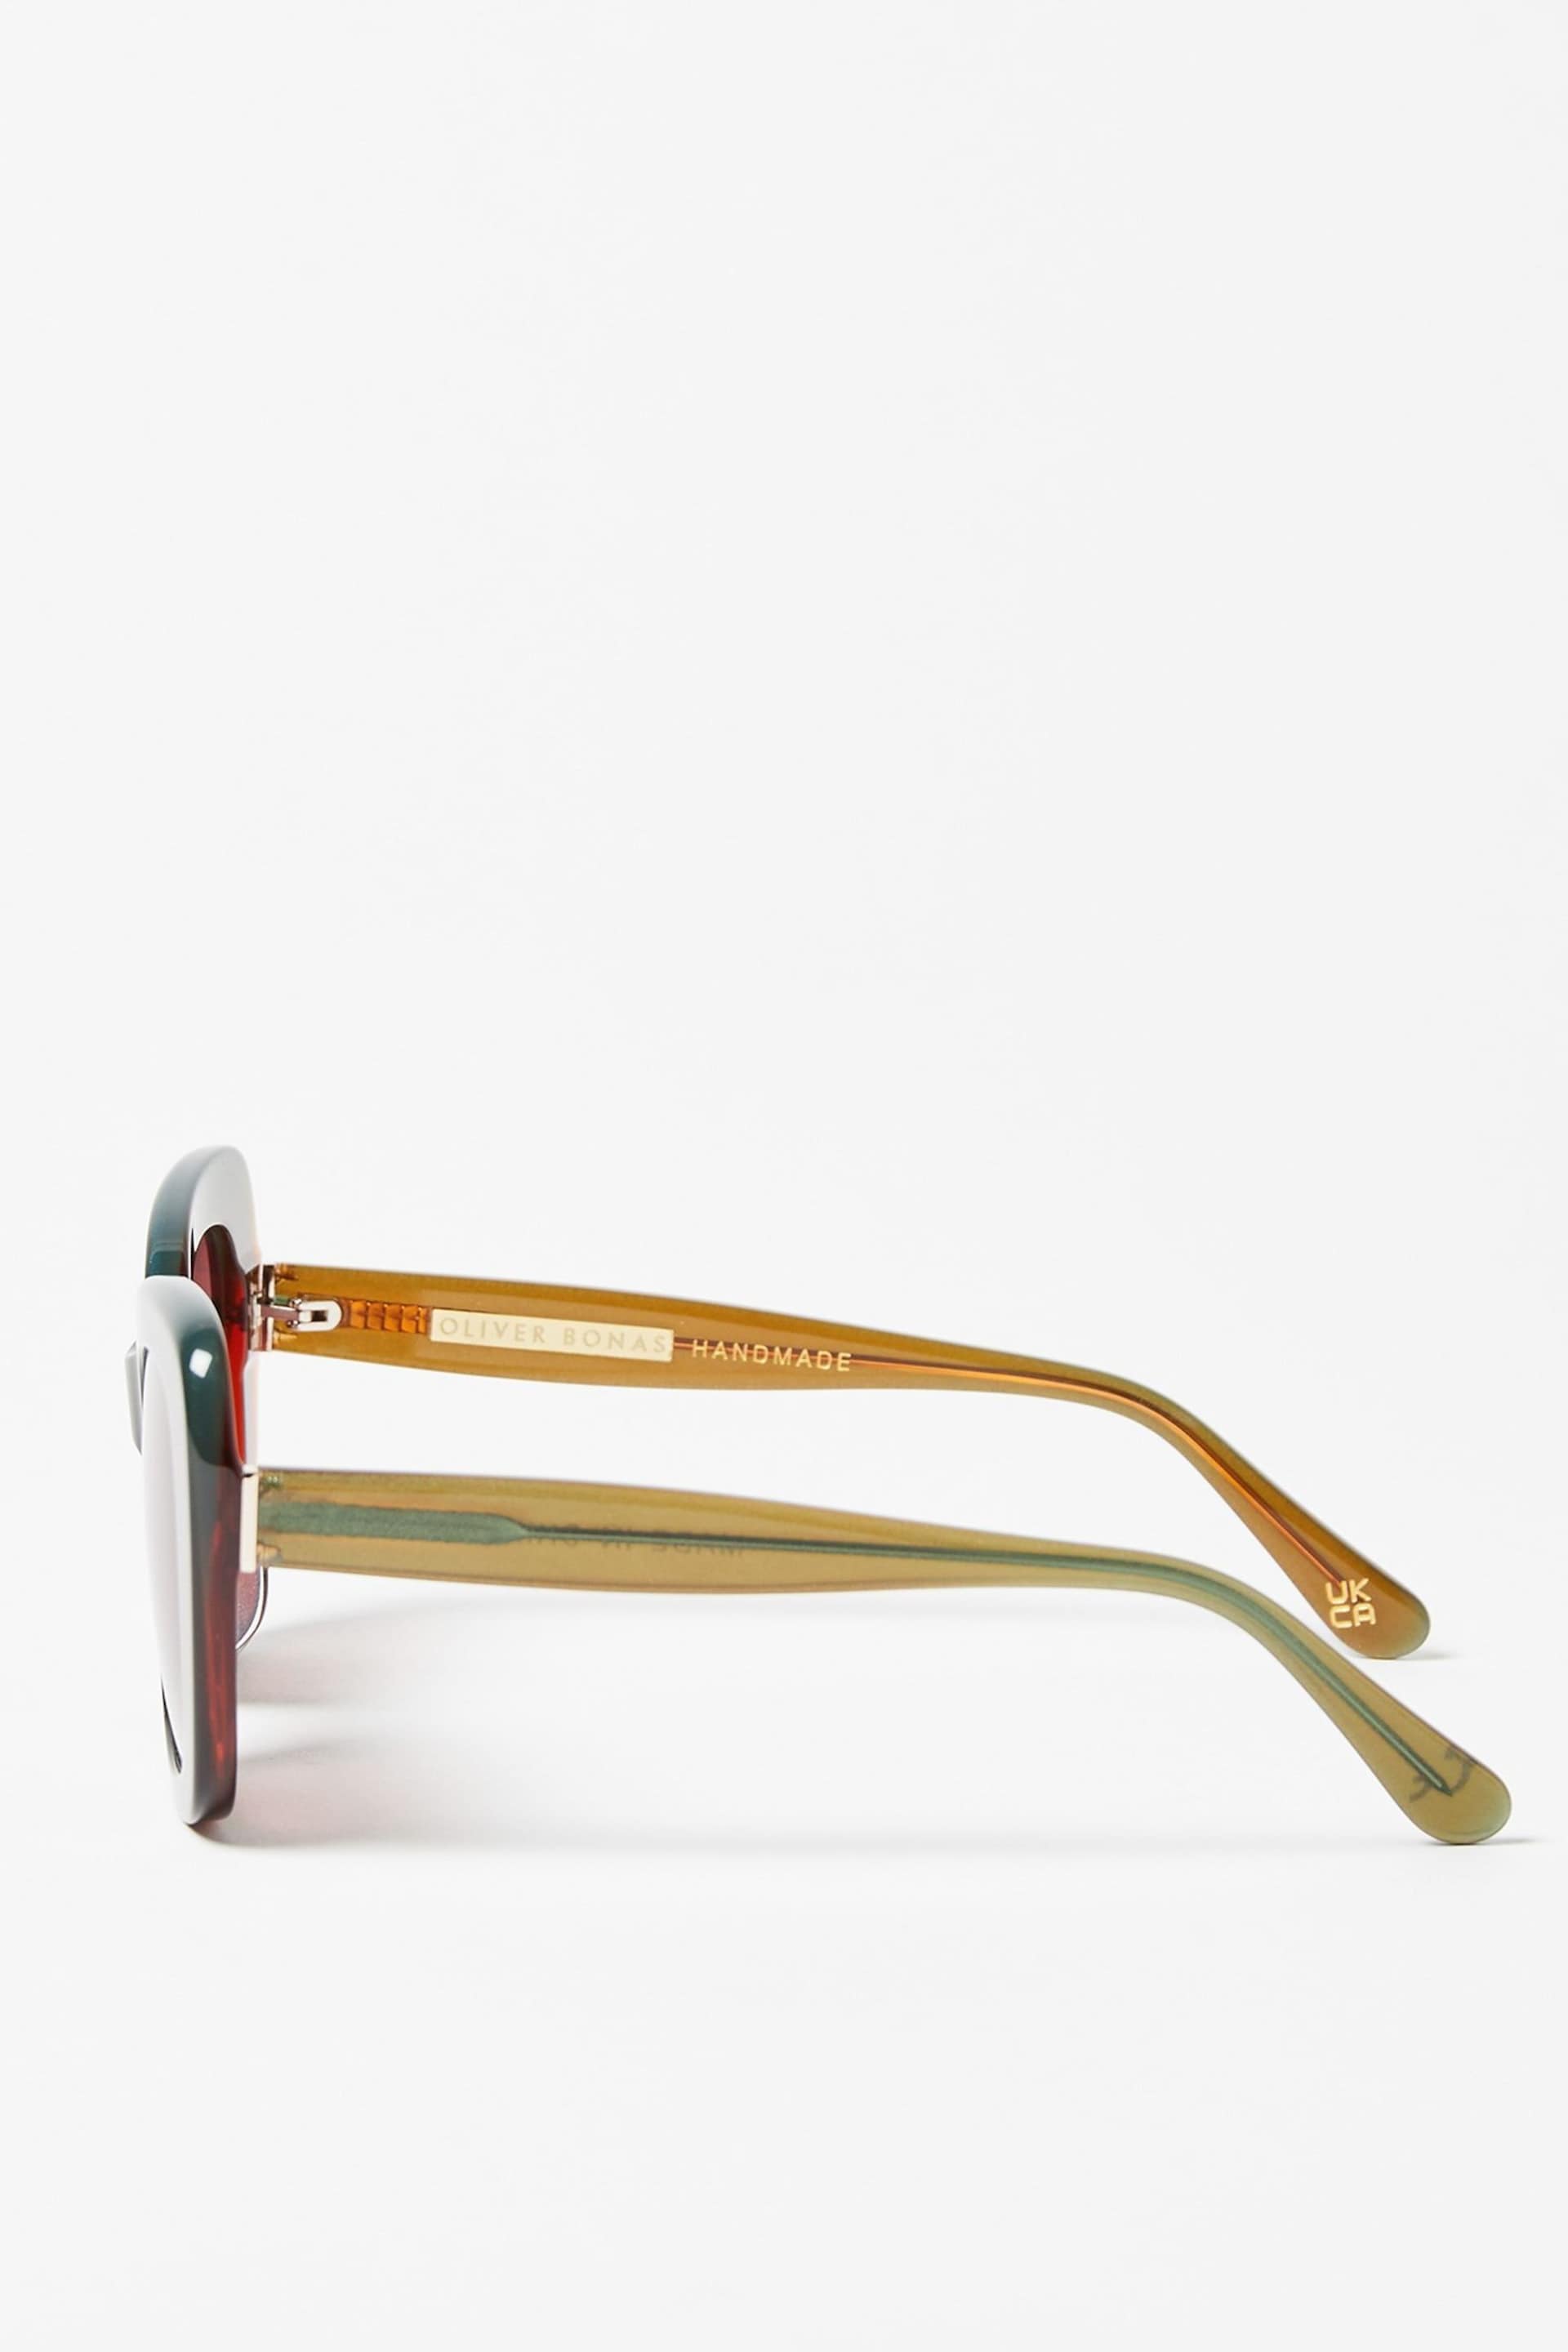 Oliver Bonas Green Ombre Shimmer Butterfly Acetate Sunglasses - Image 3 of 7